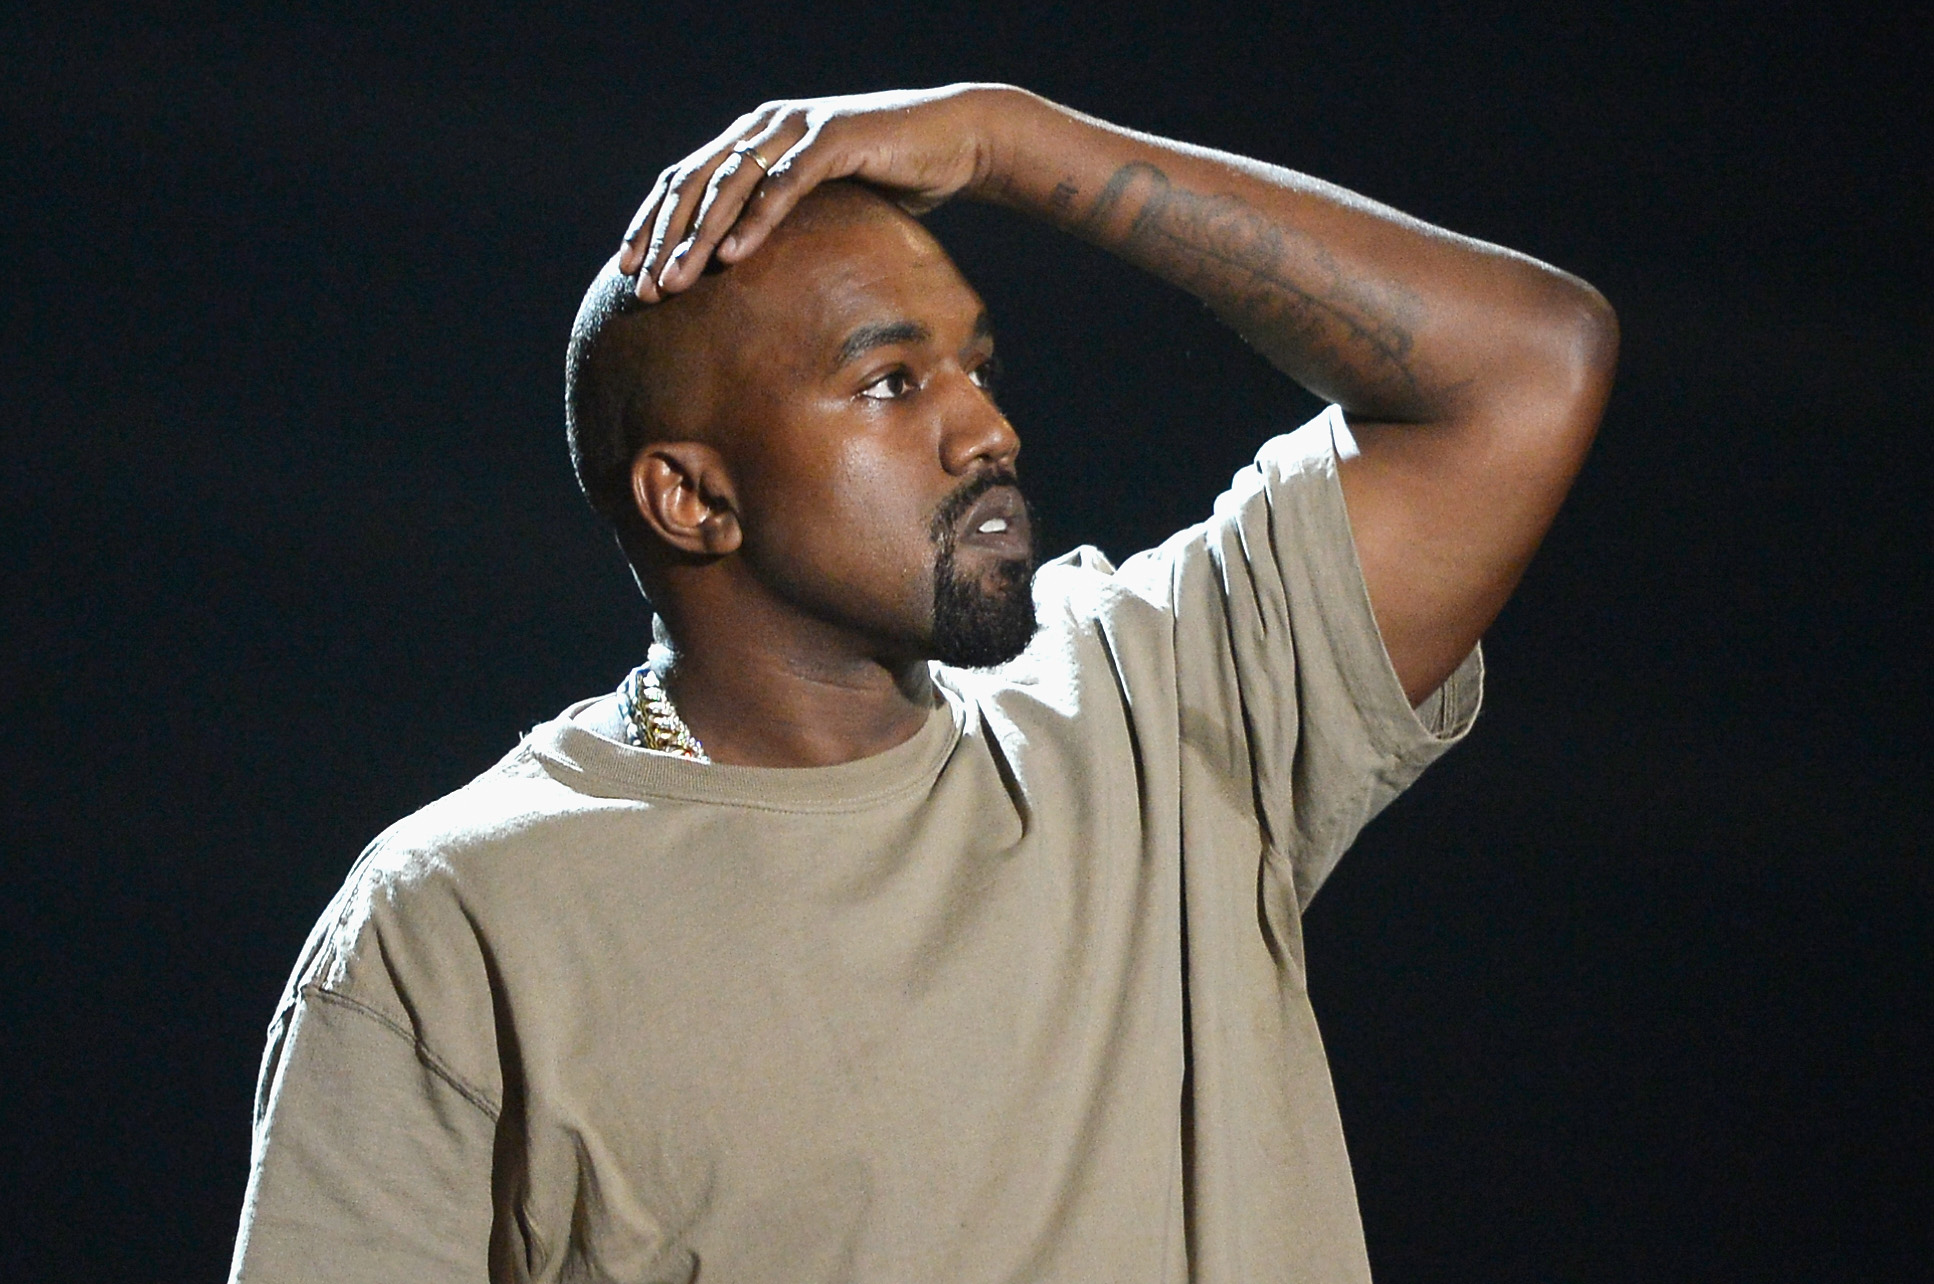 Apple Cancels Secret ‘Yeezy Airpods’ Collab With Kanye West After Sexual Harassment Allegations